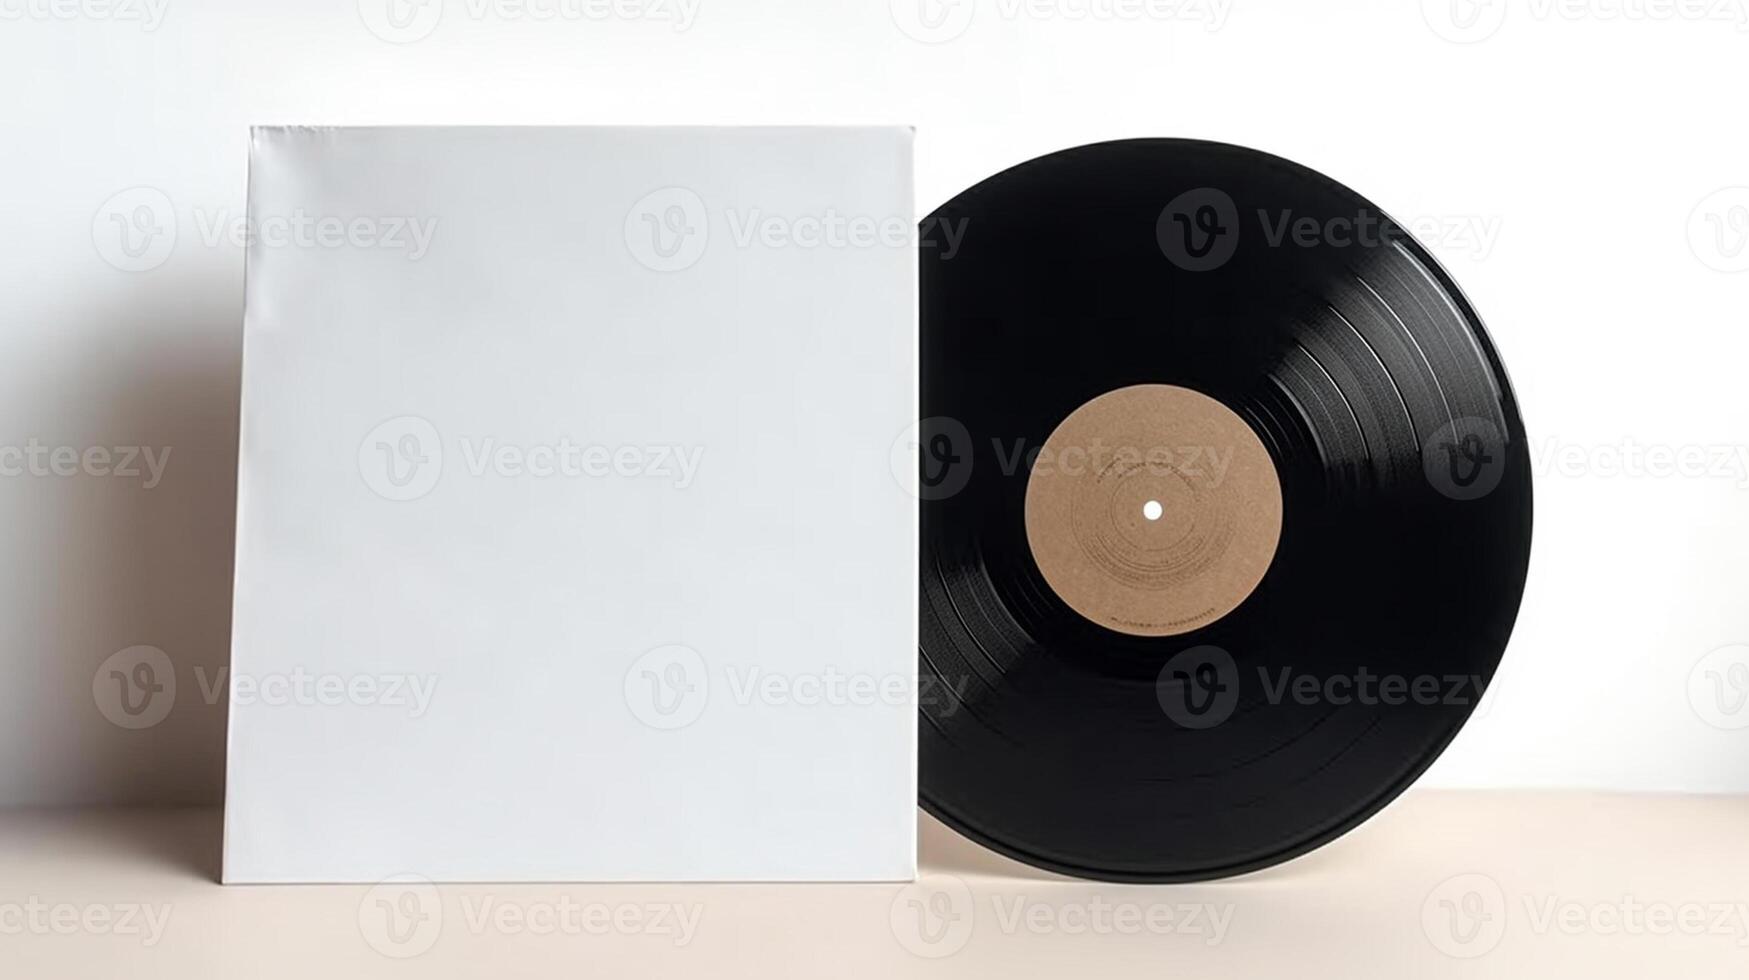 Vinyl record and Podcast CD Cover Mockup on white background, photo